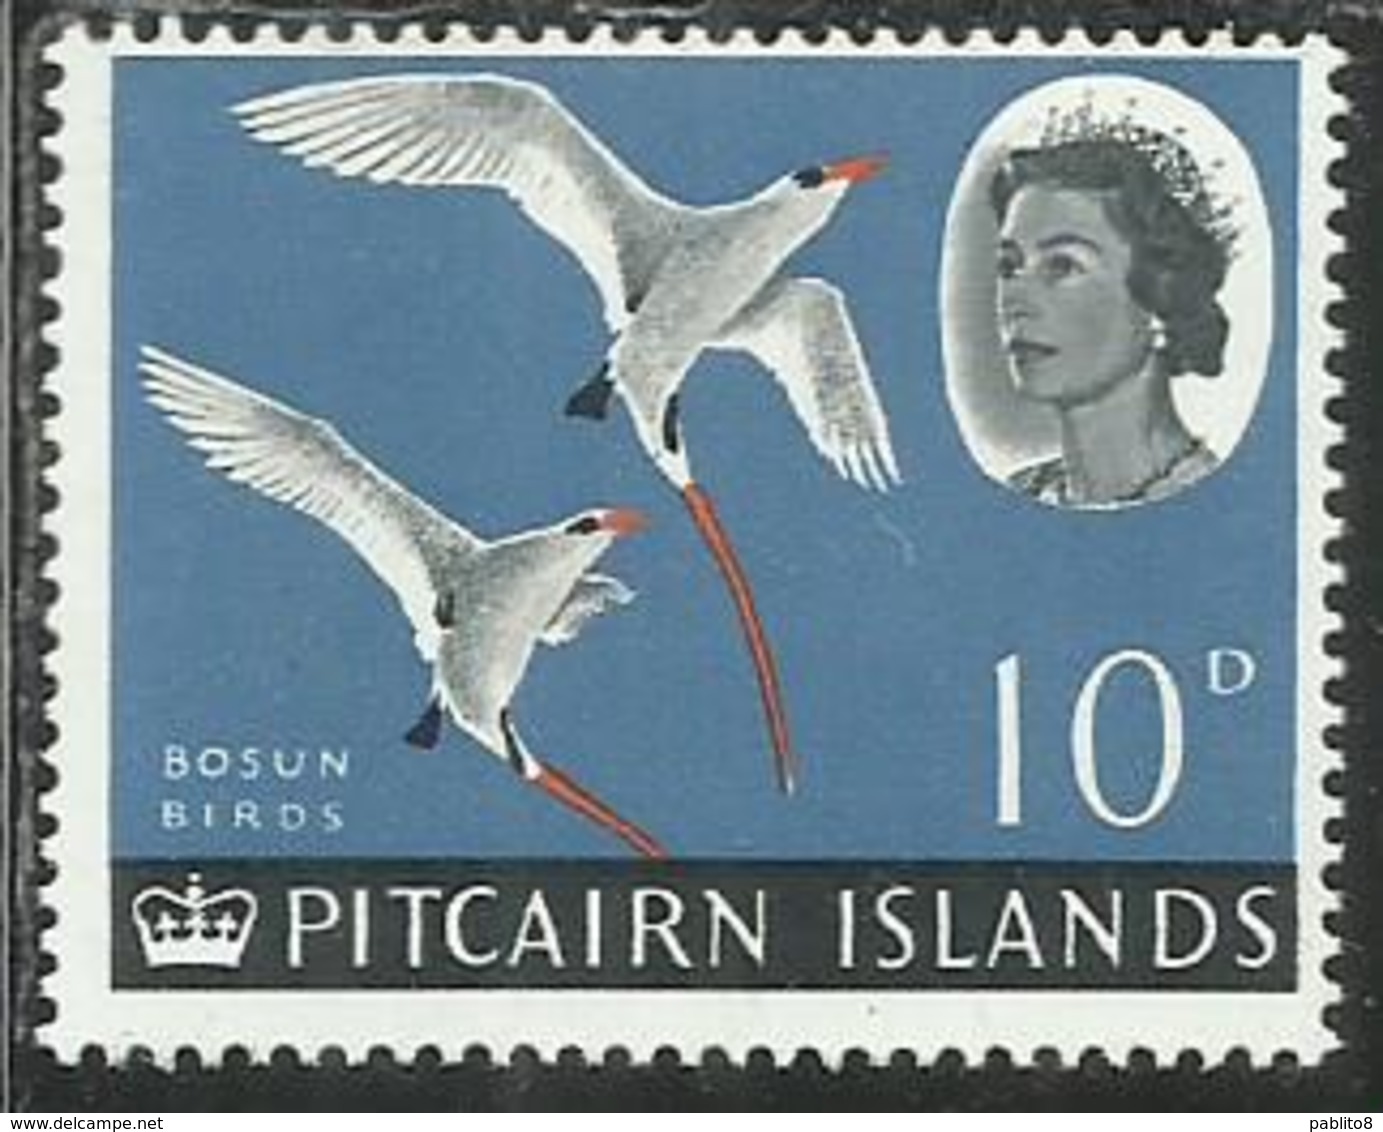 PITCAIRN ISLANDS ISOLE 1964 1965 DEFINITIVES RED-TAYLED TROPIC BIRDS BIRD UCCELLO FAUNA 10p MNH - Pitcairn